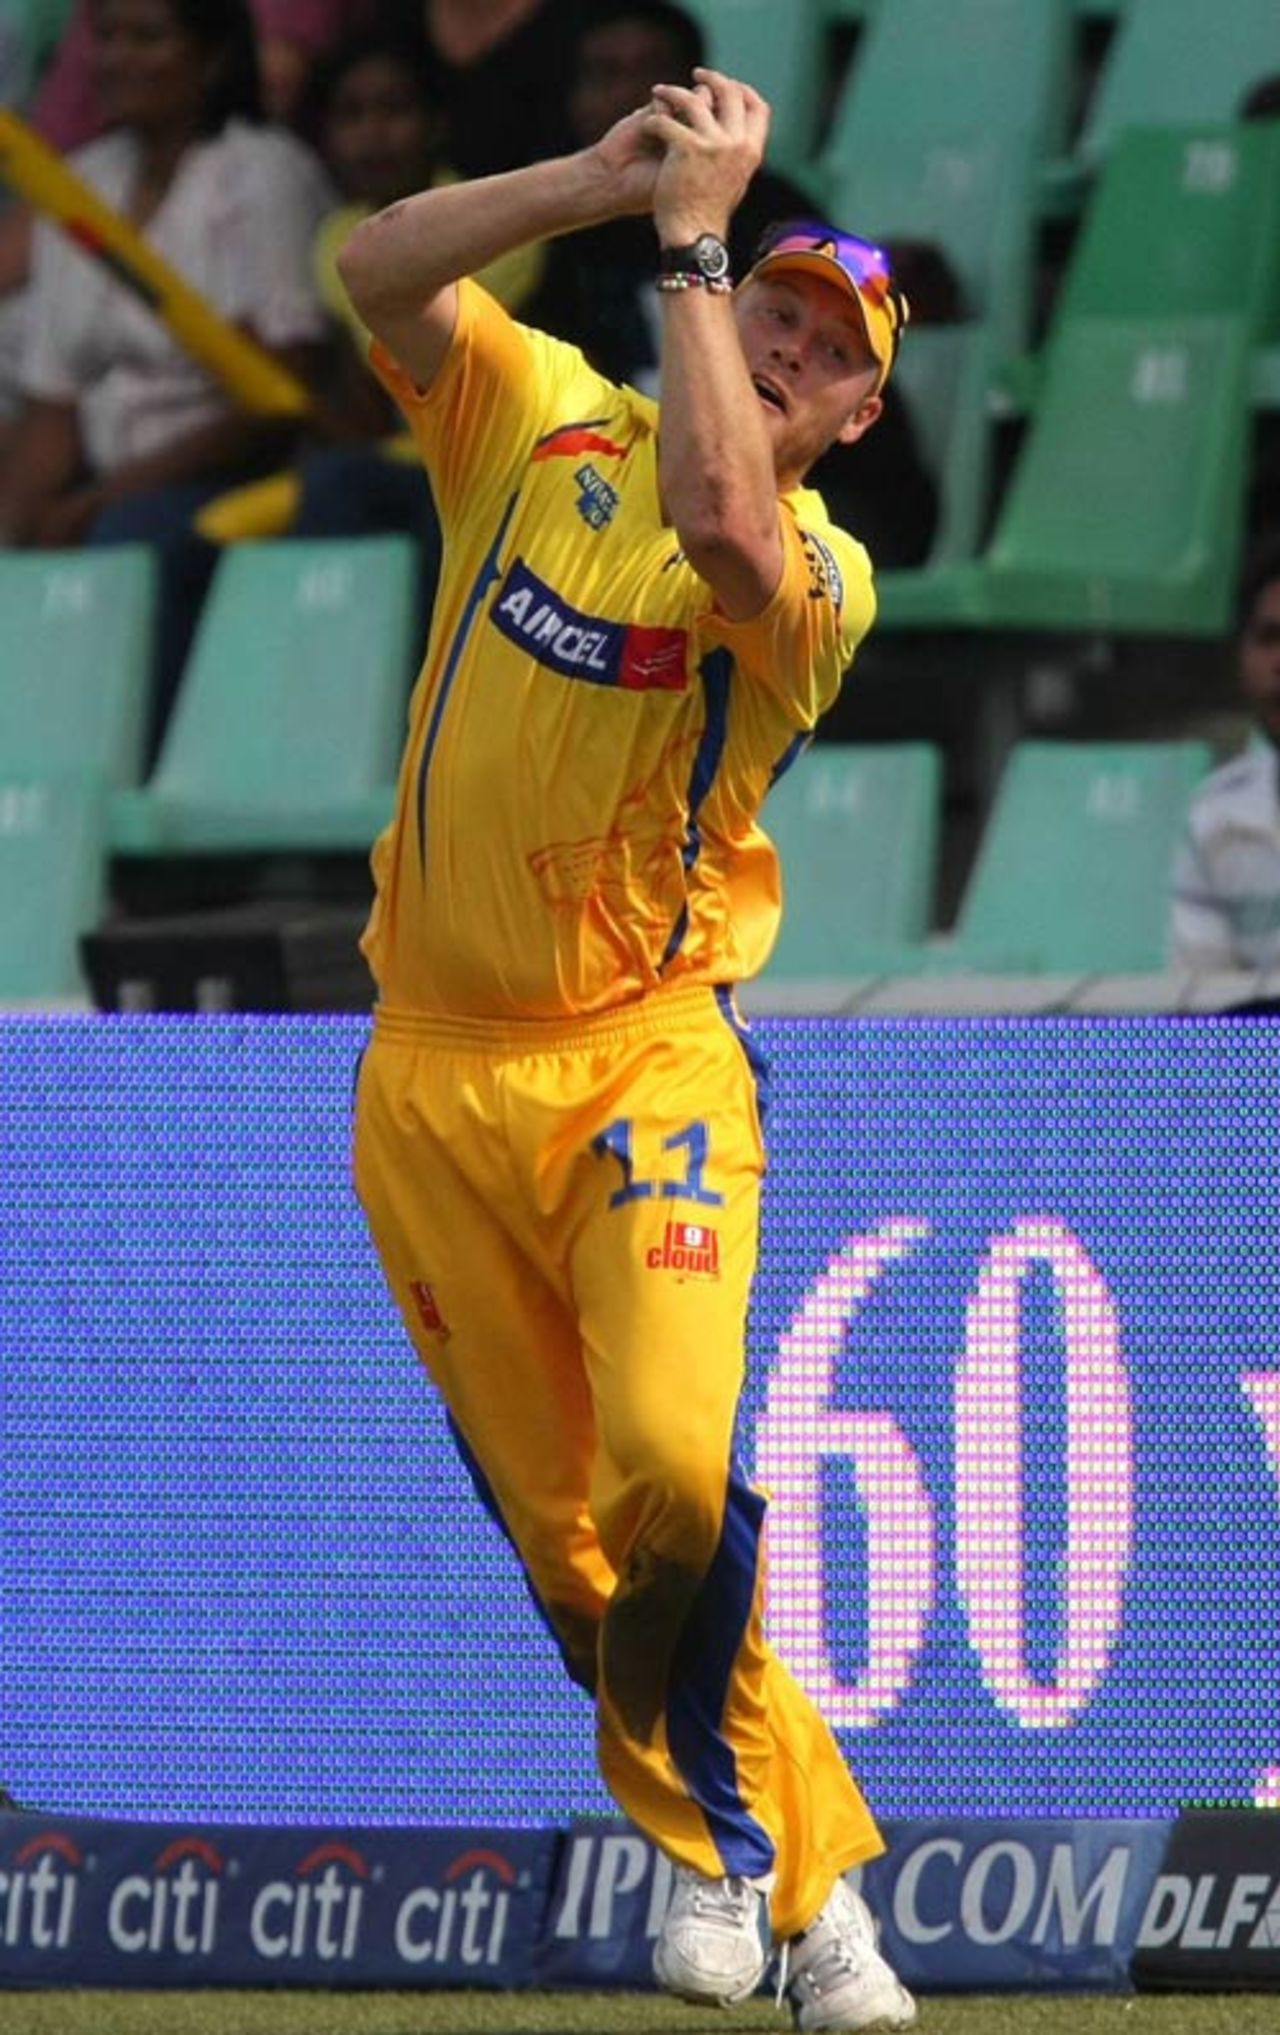 Andrew Flintoff latches on to a catch at the boundary, Chennai Super Kings v Delhi Daredevils, IPL, 9th match, Durban, April 23, 2009